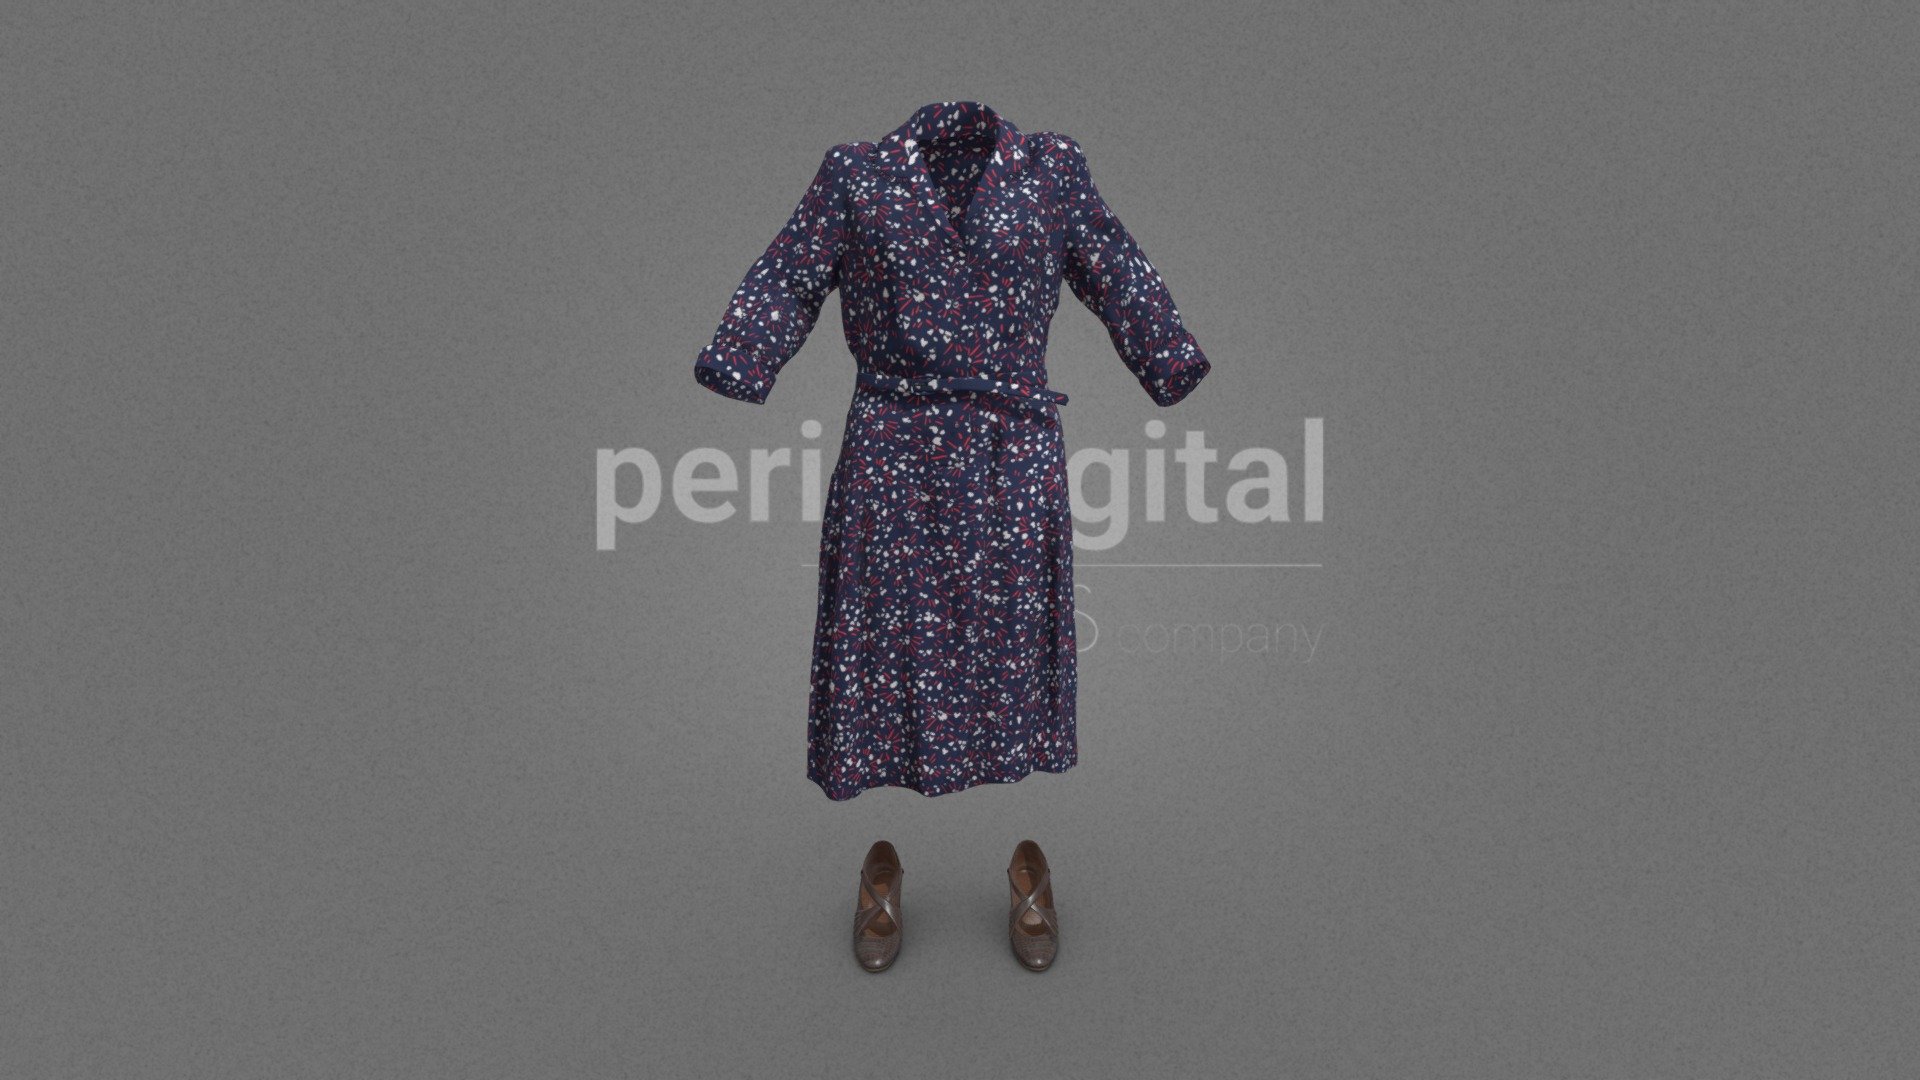 Navy blue shirt dress printed in red and white tones, long sleeves and belt; brown leather heeled shoes with cross strap.

Our &ldquo;40s